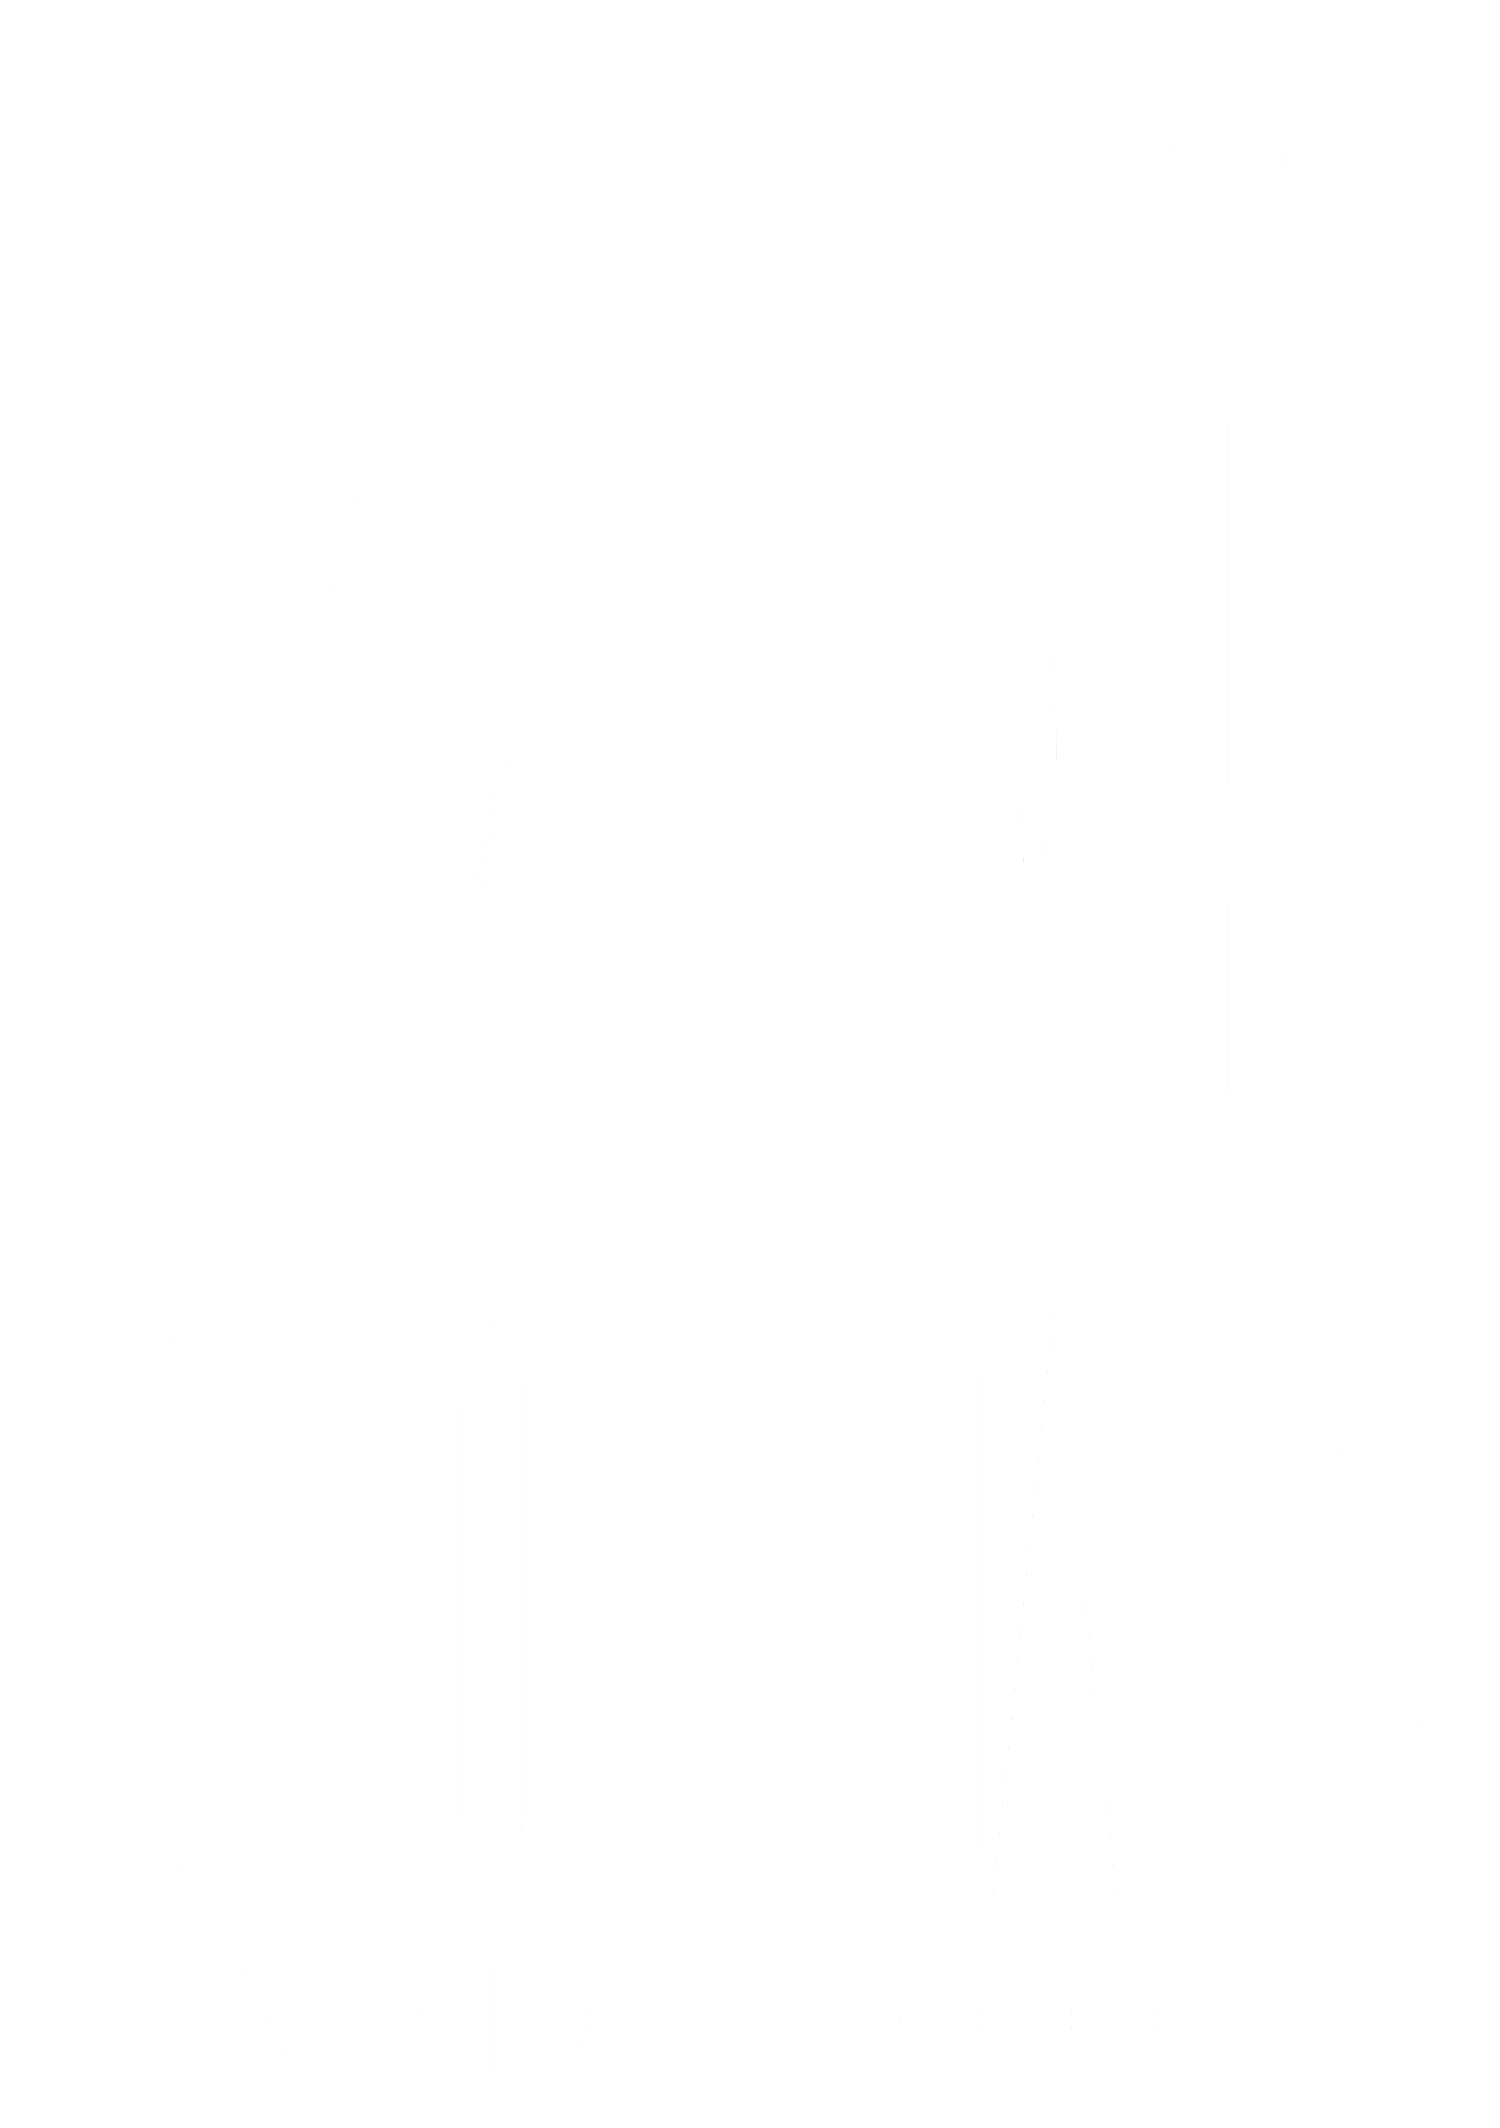 Old Goats Hard Goods | Custom Cabinetry and Architectural Hardware | Whitefish &amp; Hamilton, MT, and Sun Valley, ID